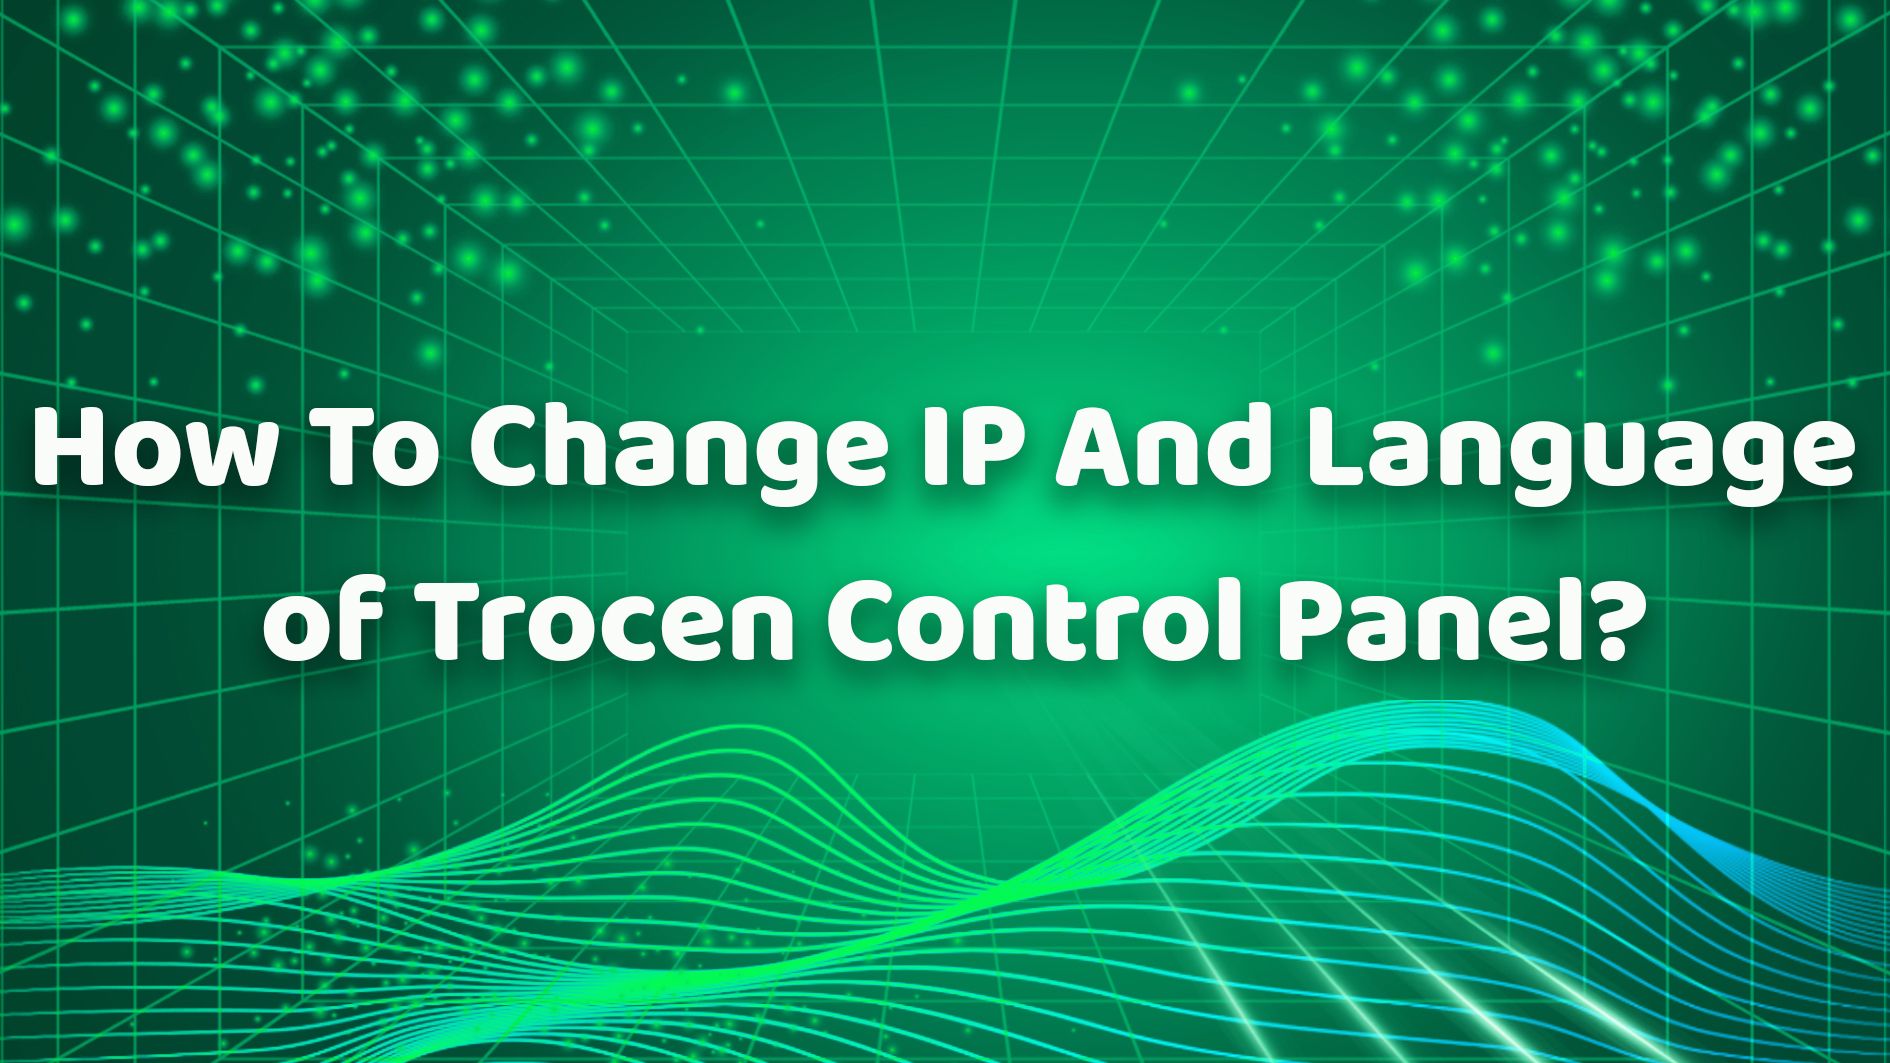 How To Change IP And Language of Trocen Control Panel？